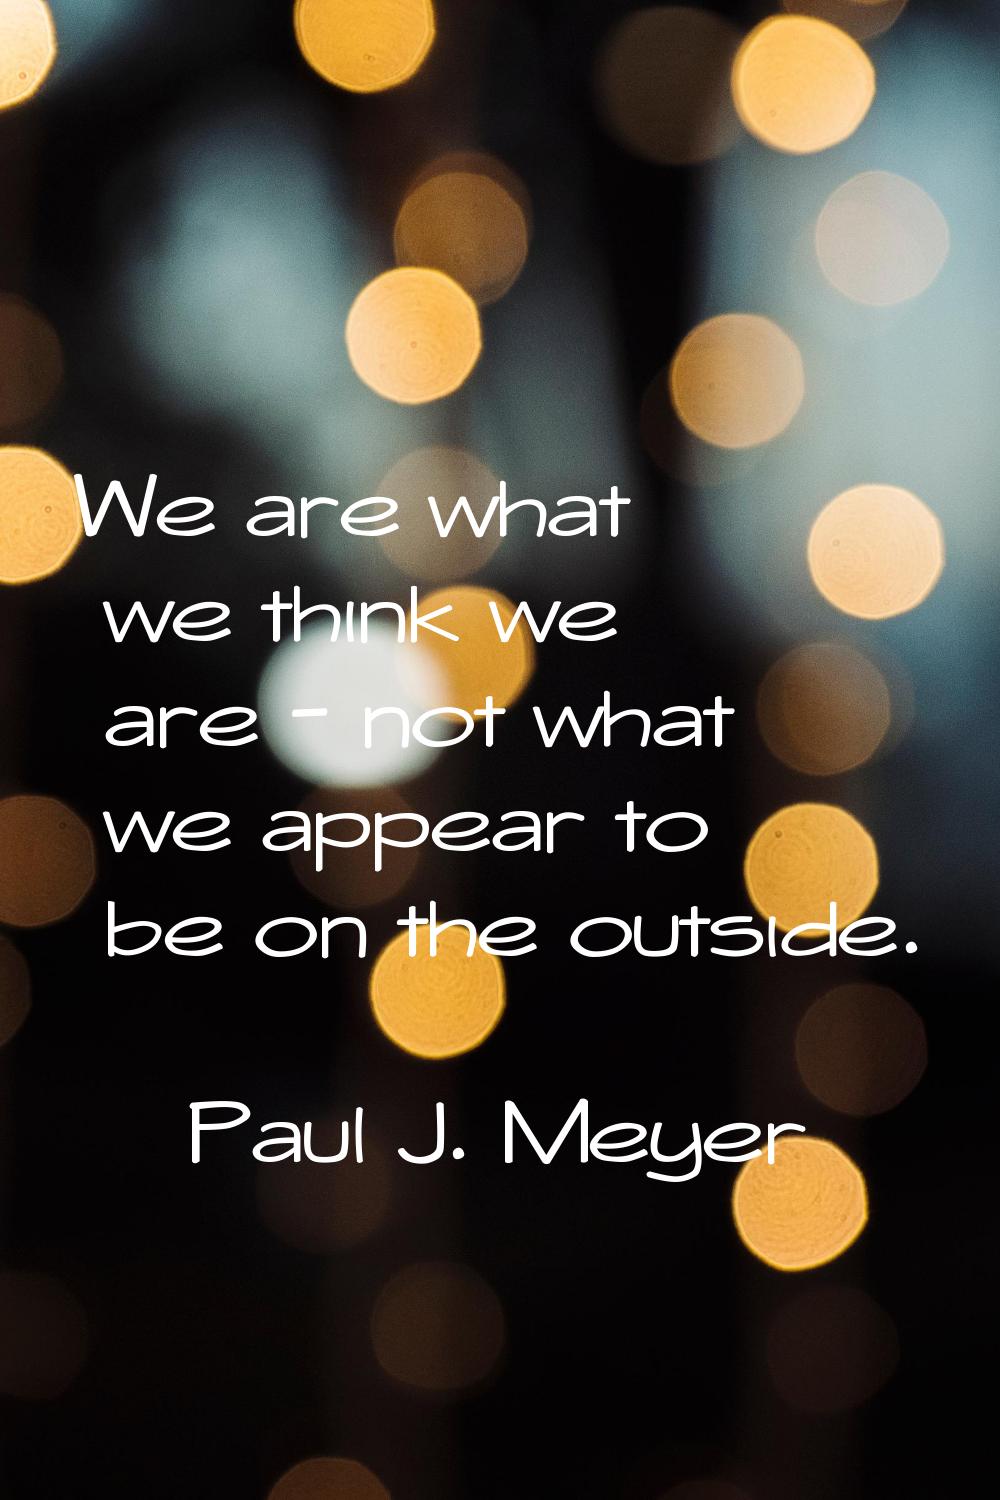 We are what we think we are - not what we appear to be on the outside.